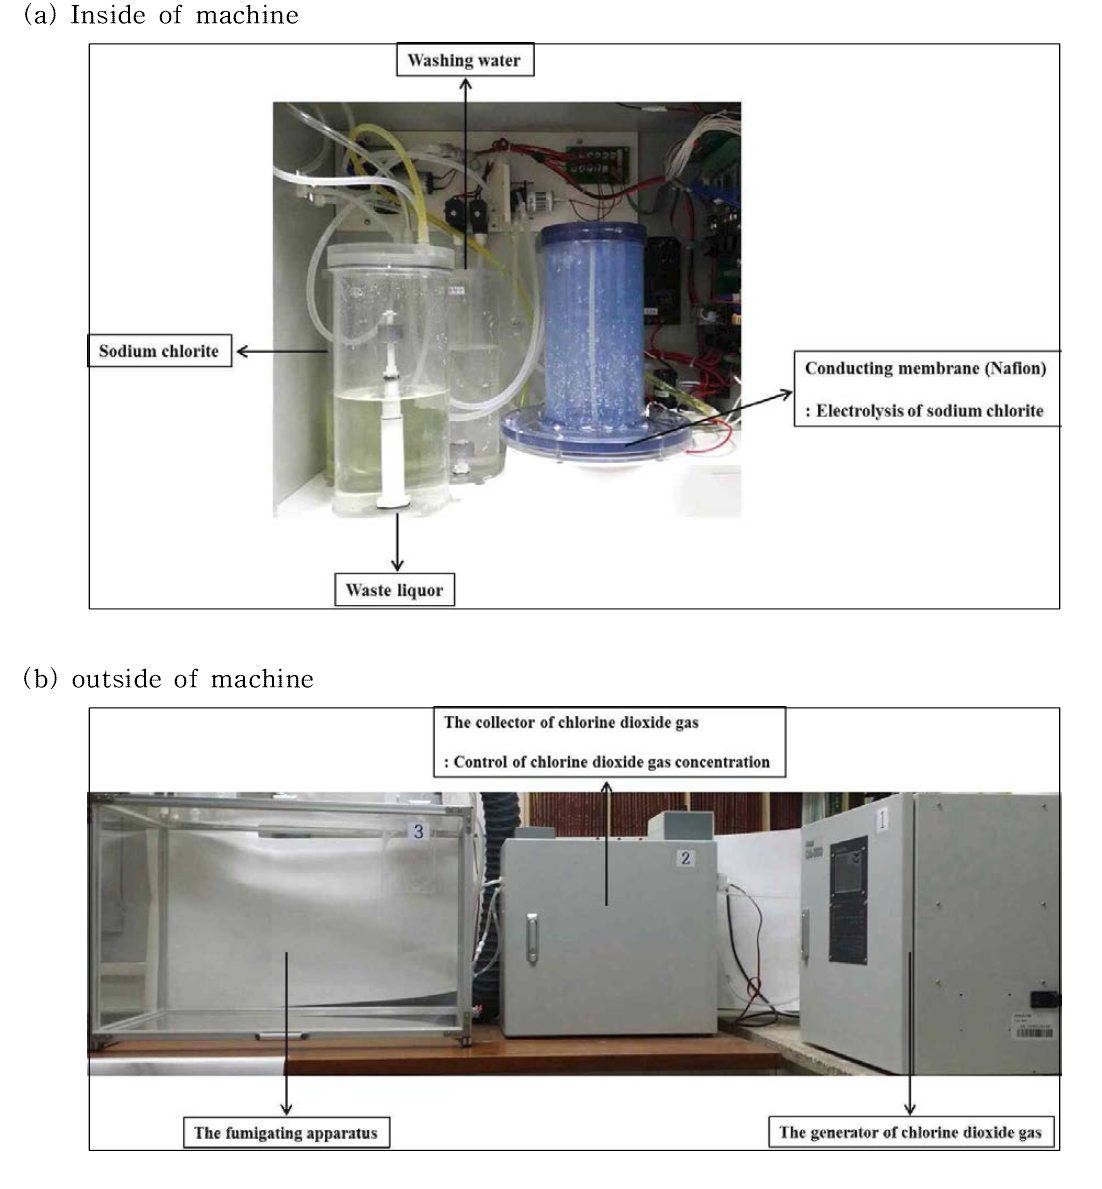 The small-scale chlorine dioxide gas generating machine